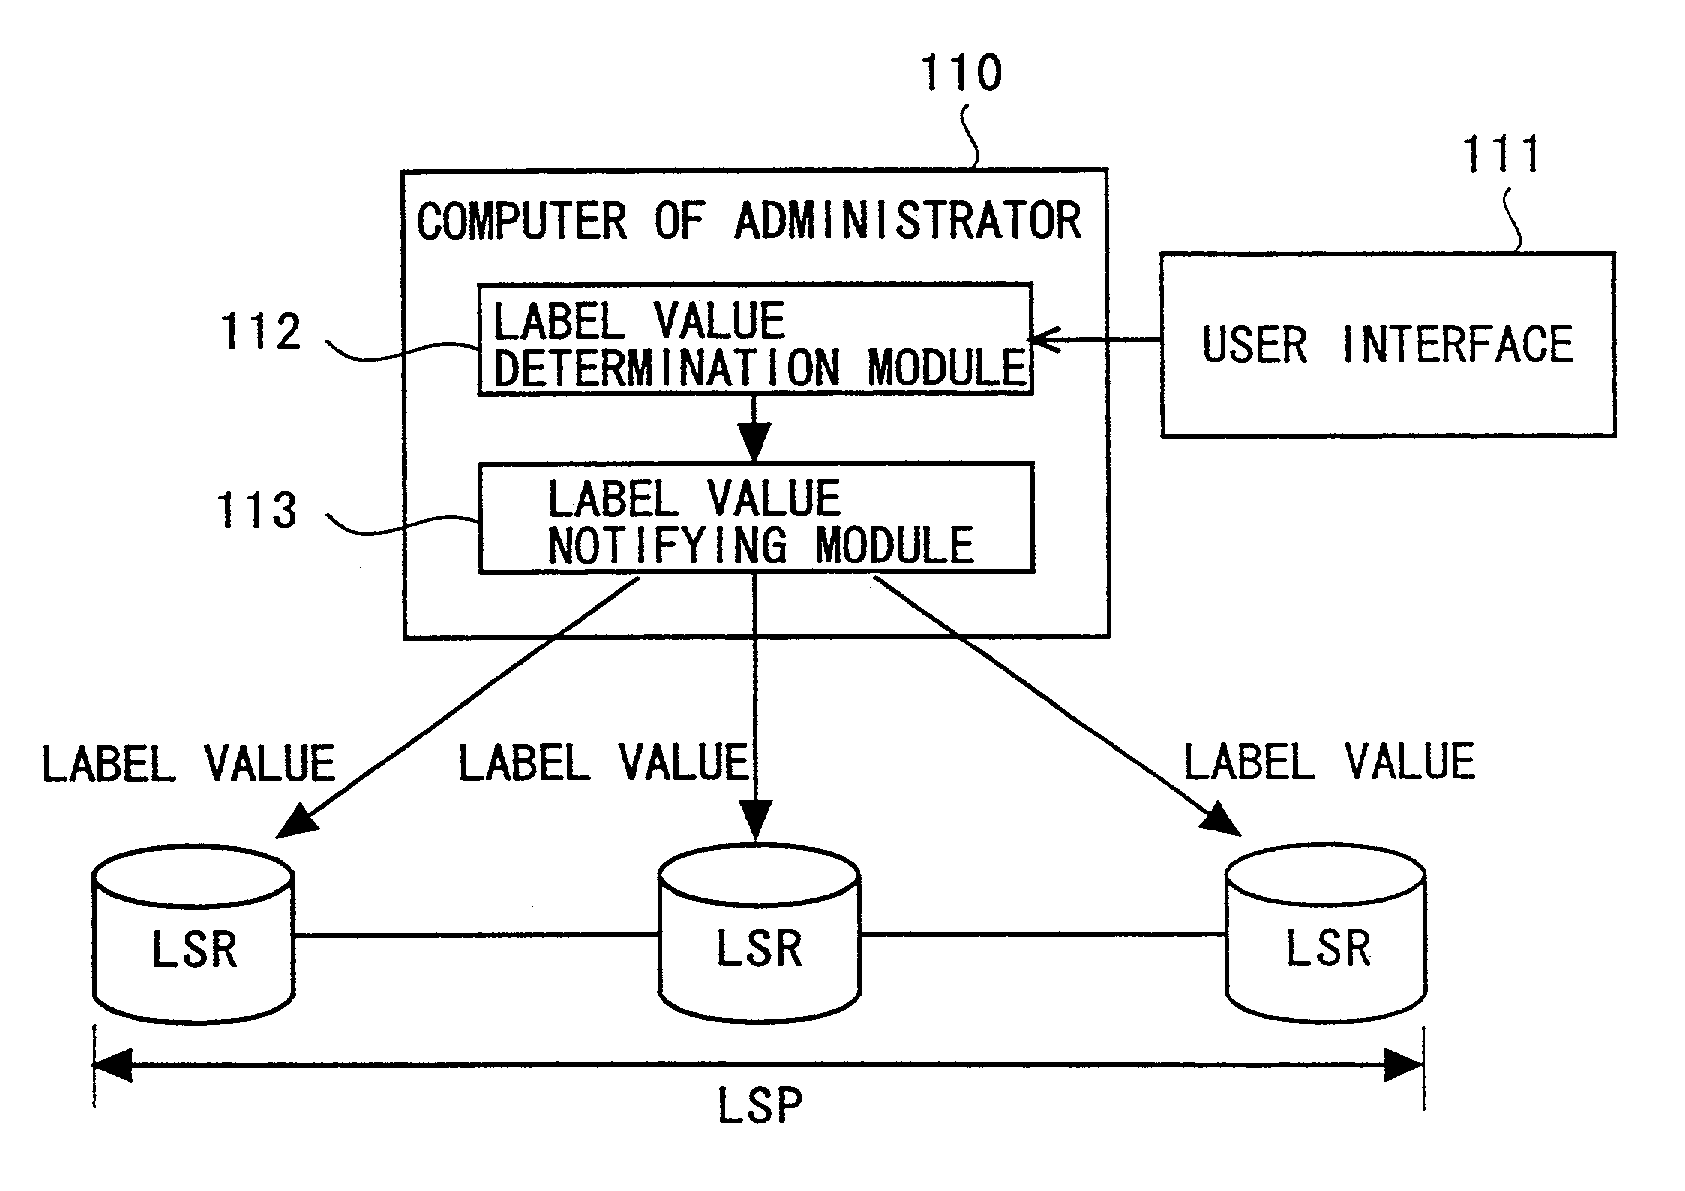 Link identifier assignment system in connection-oriented communication network